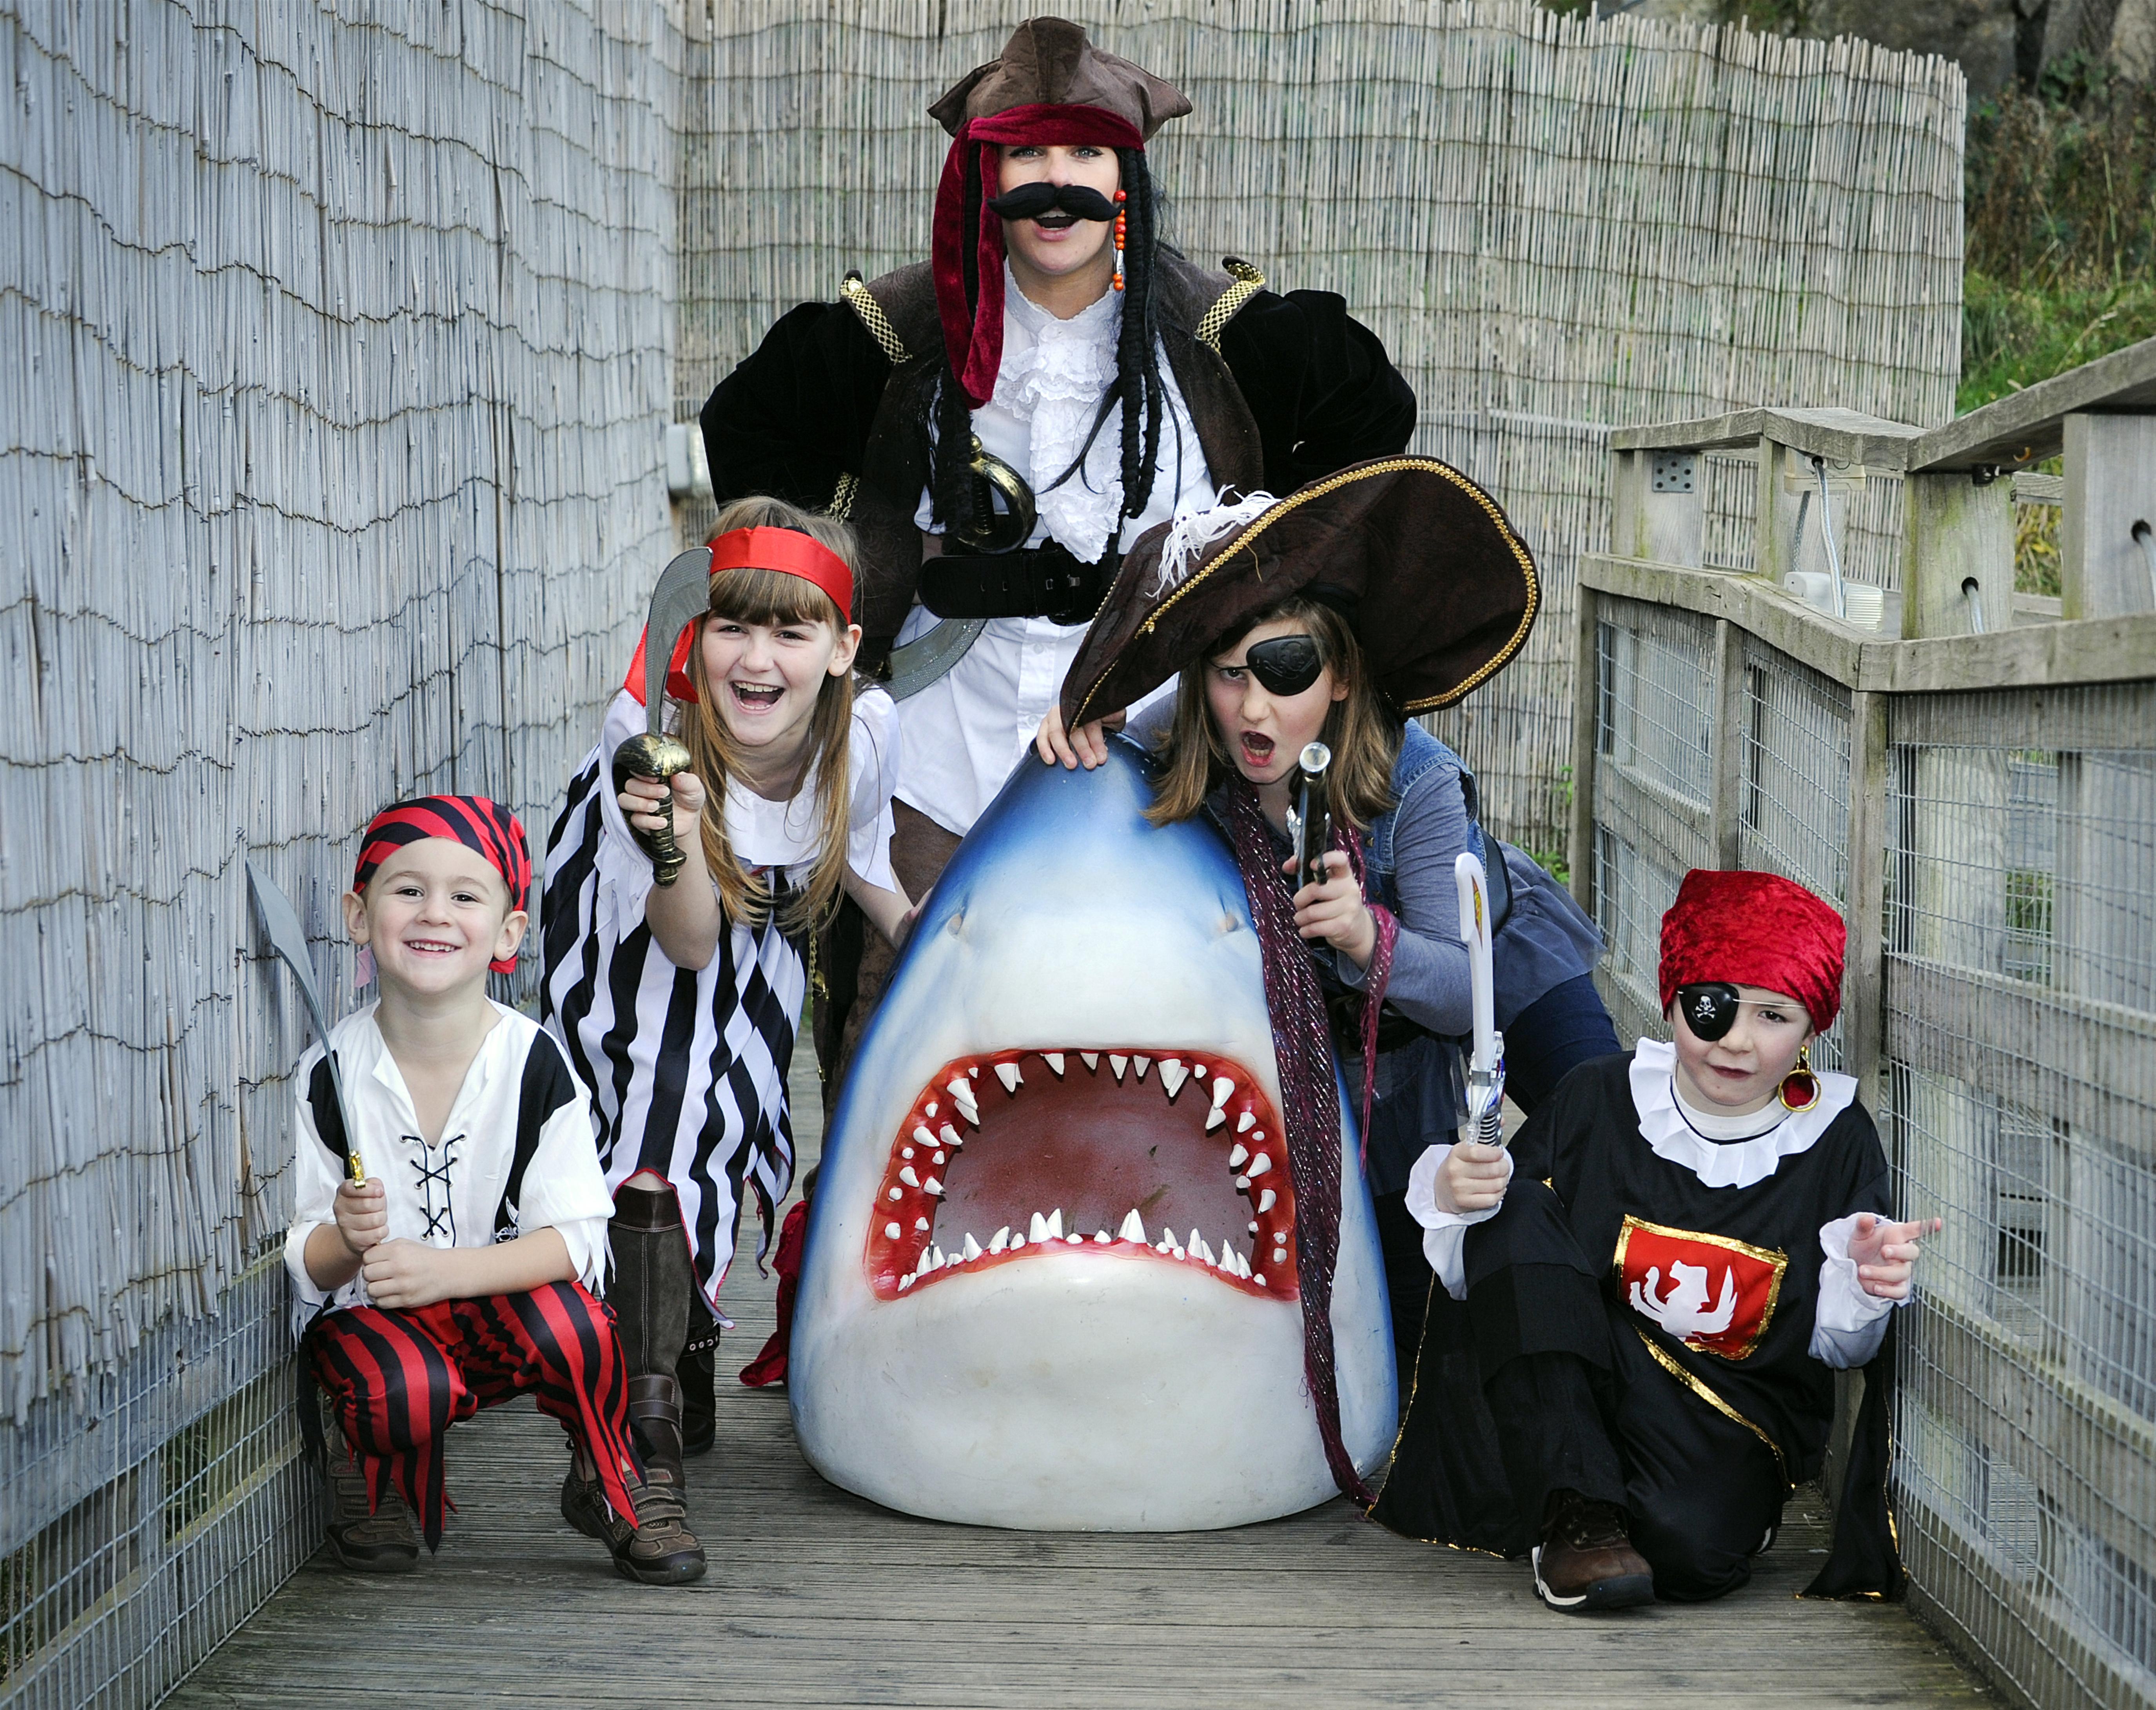 Pirates and Princesses go free at Deep Sea World, North Queensferry